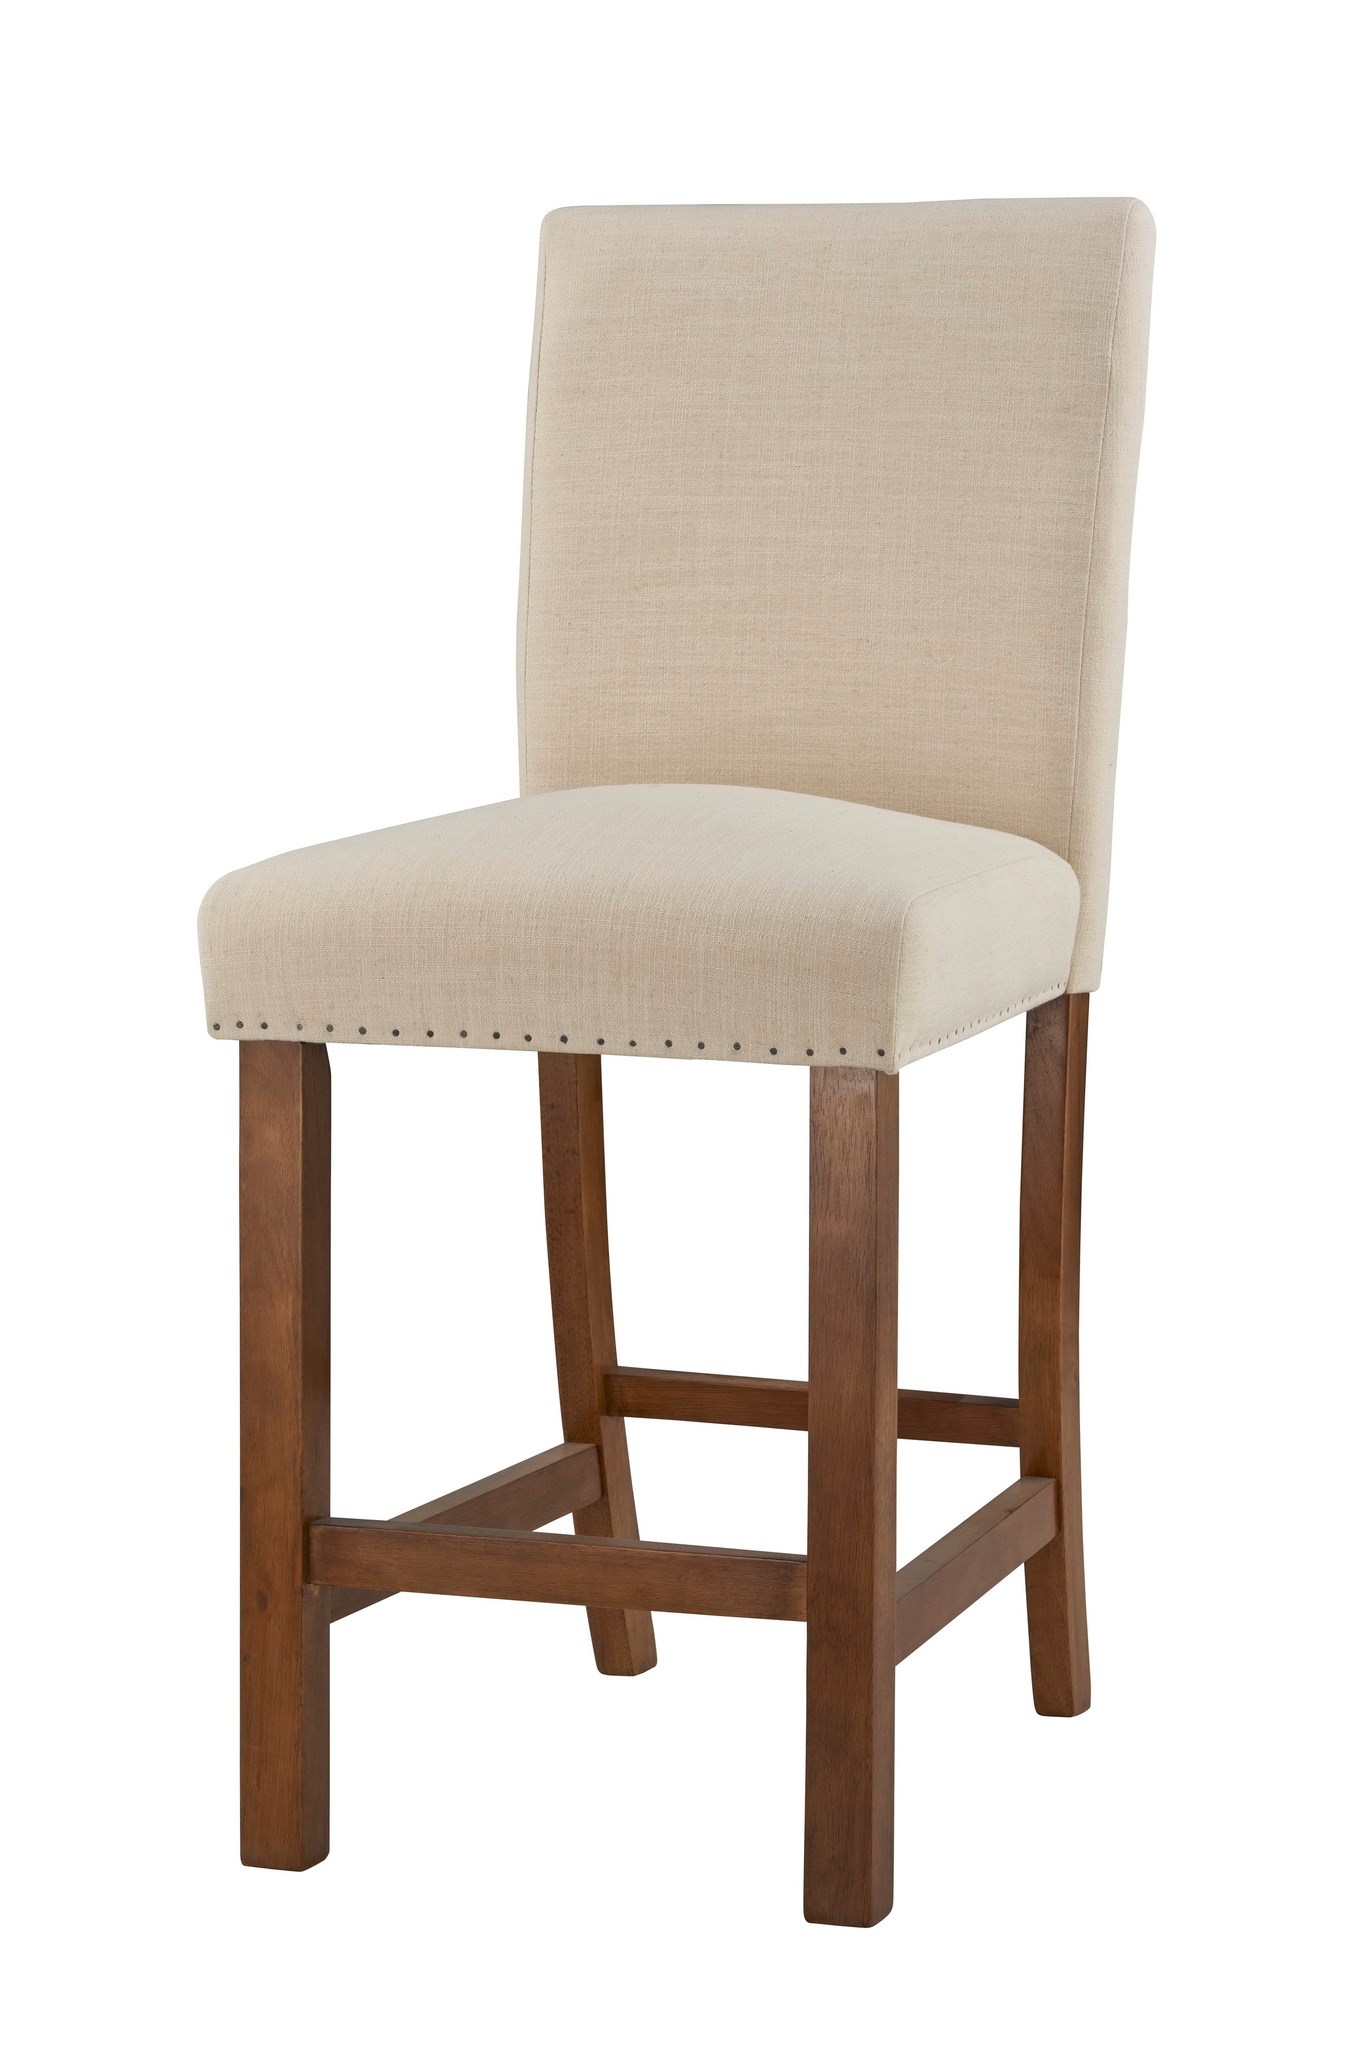 Furniture Bar Stools Forty West Designs, Forty West Bar Stools